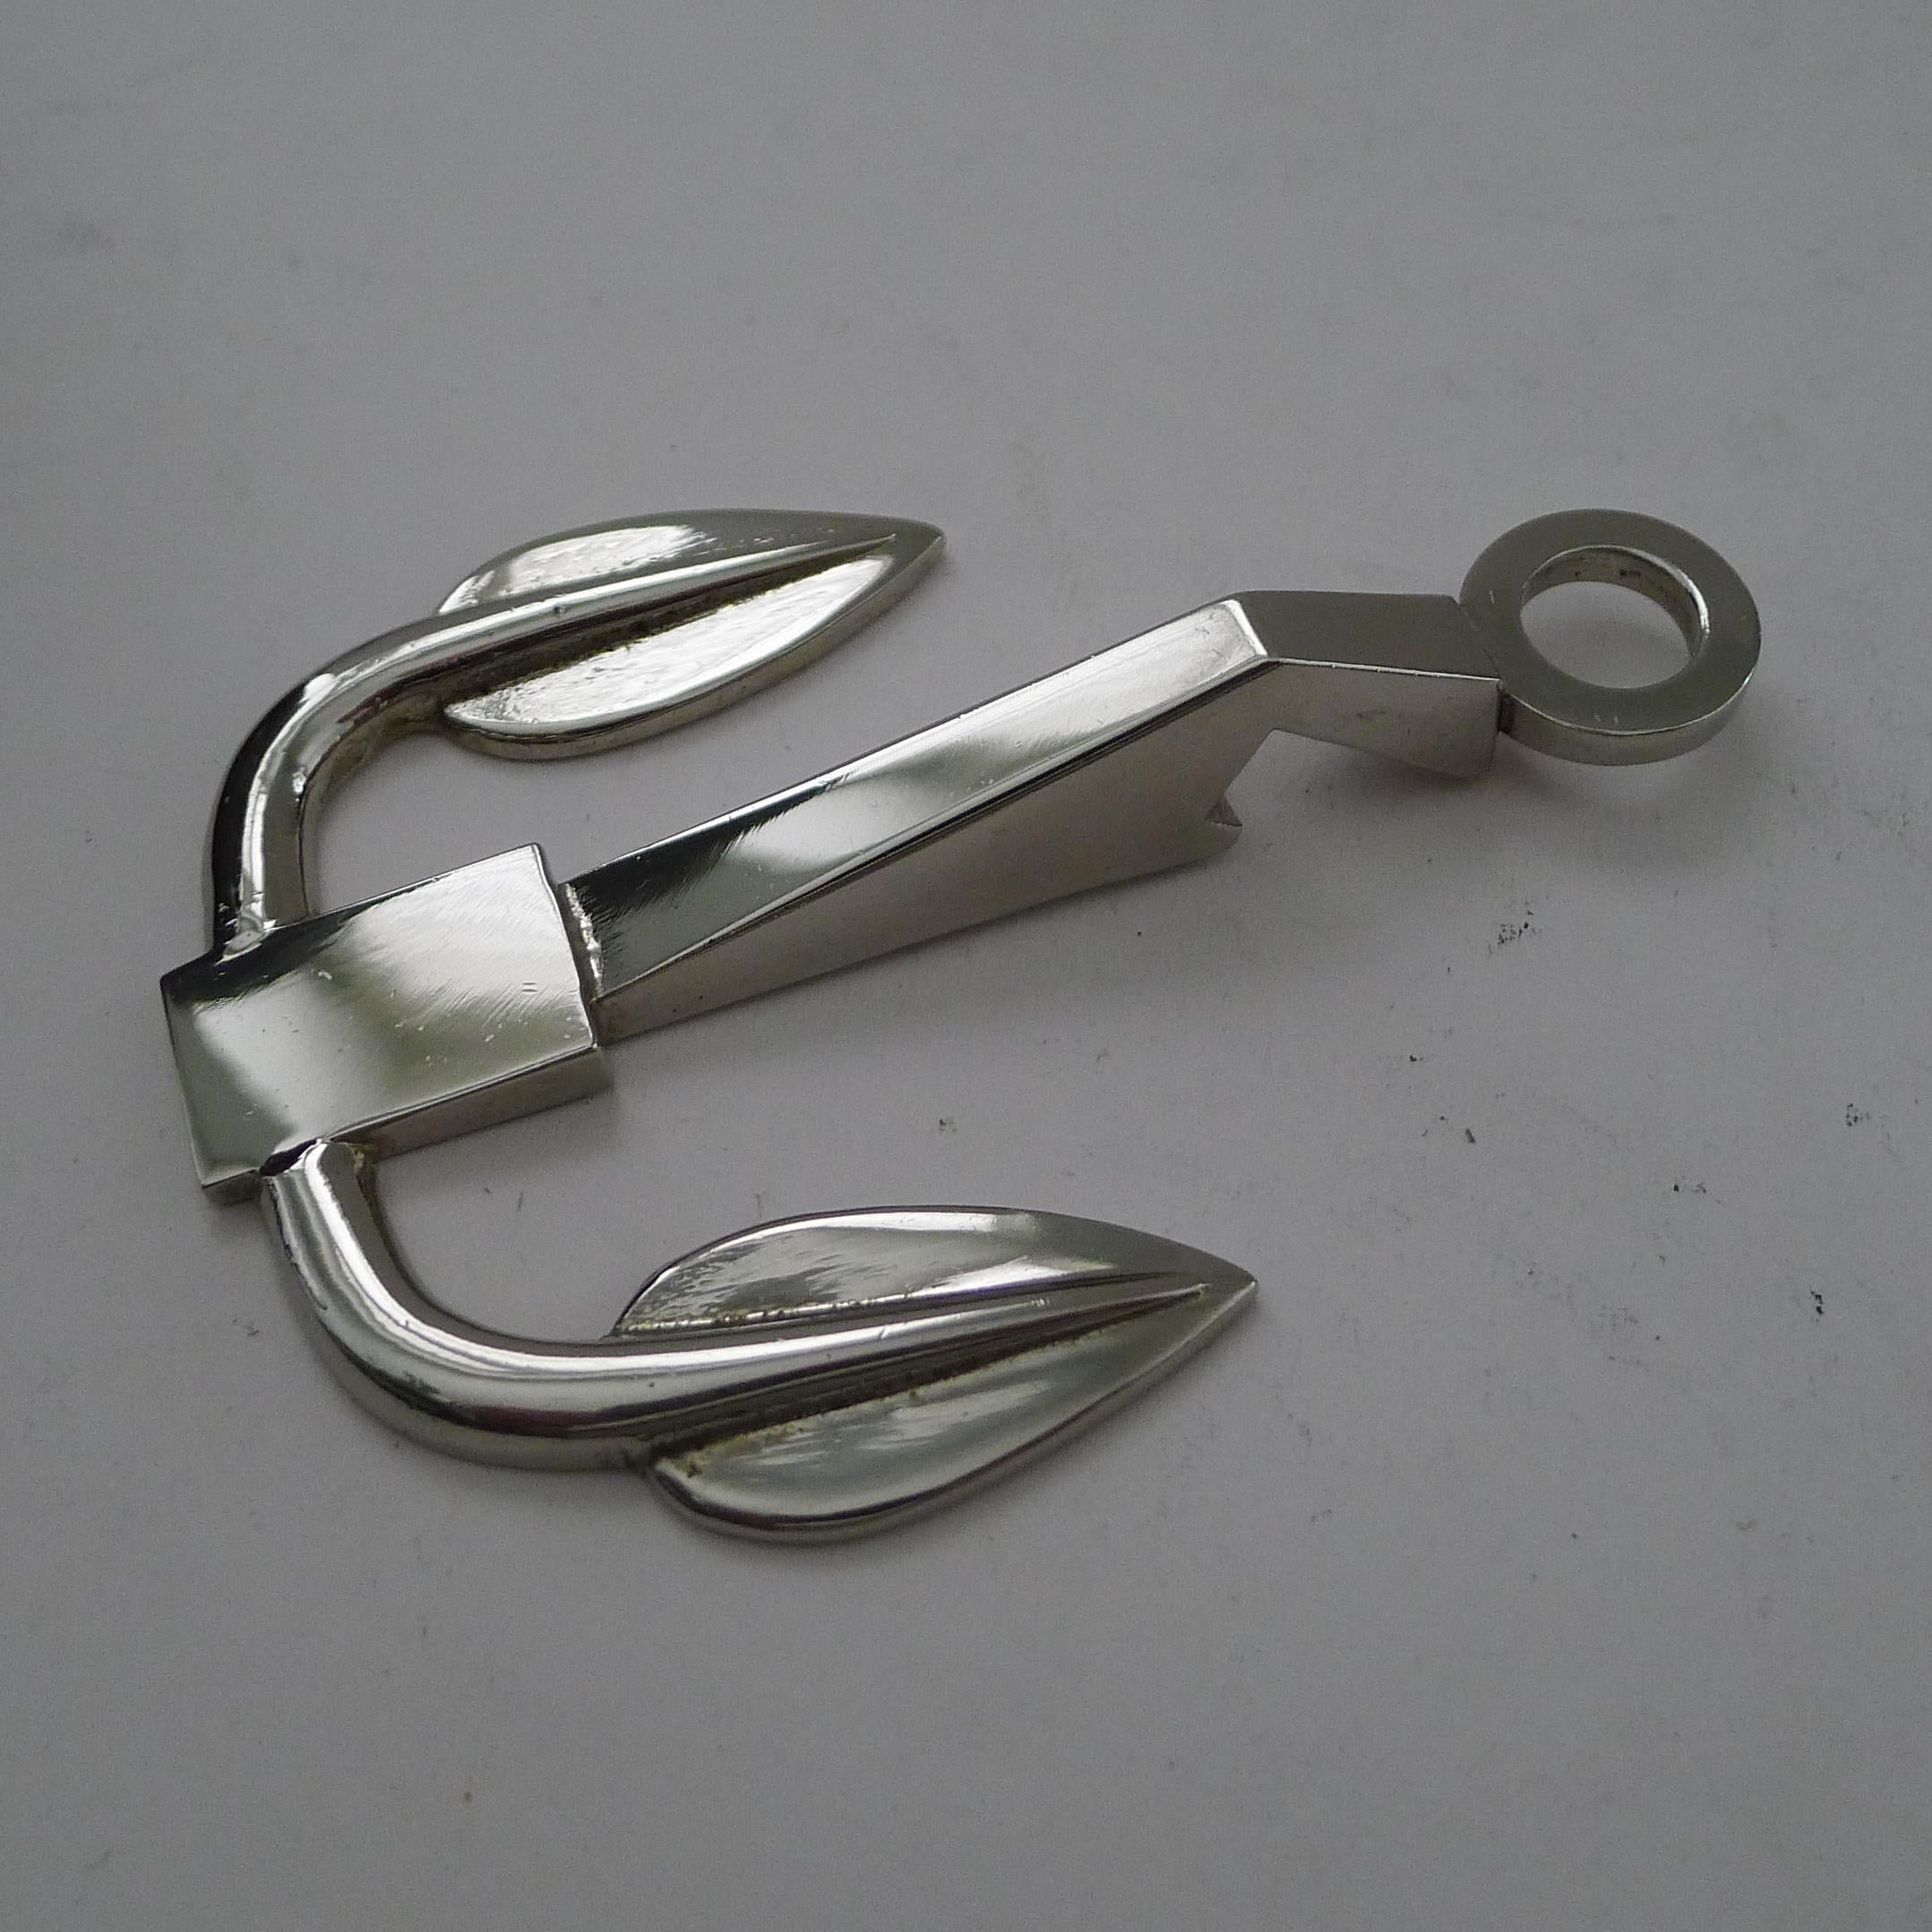 A rarely found Italian chromium bottle opener in the form of an anchor signed on the underside by 